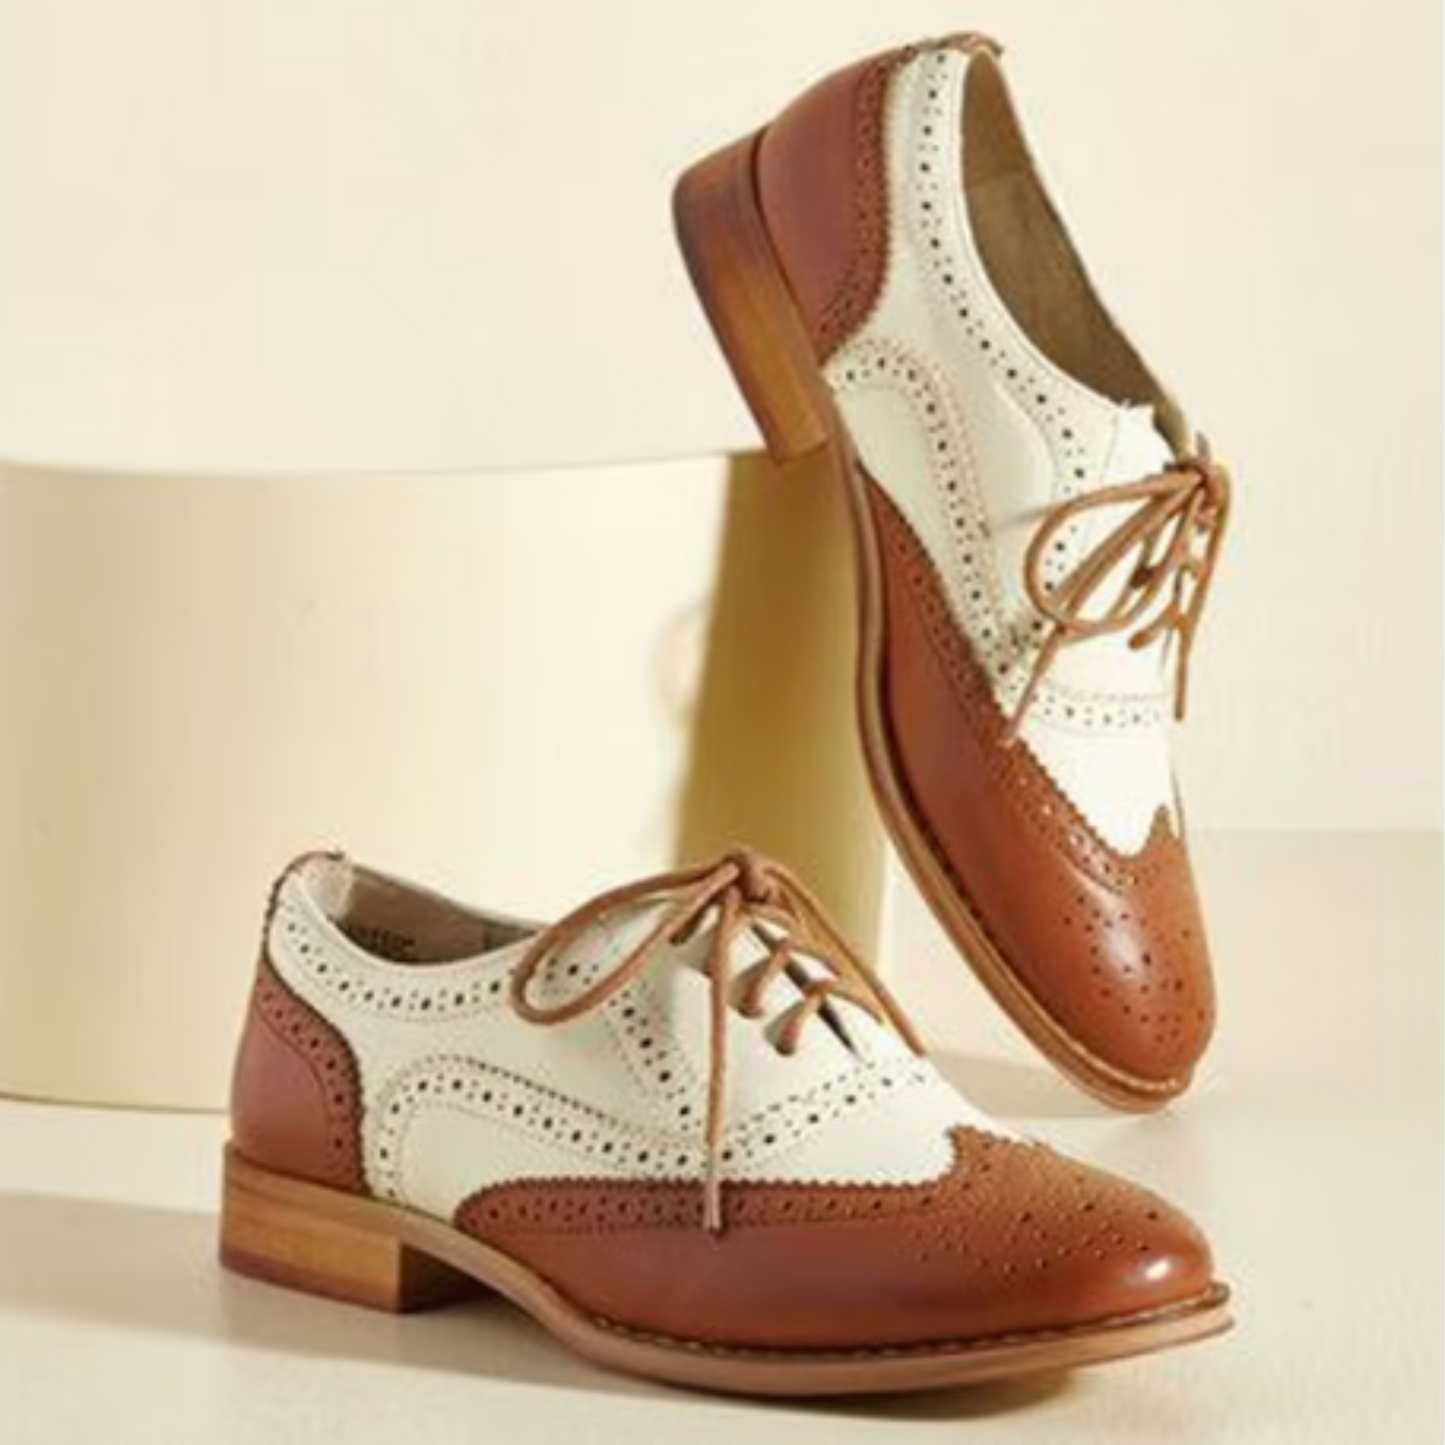 Bespoke Women's Half White and Tan Leather Oxford Wingtip Lace up Dress Shoes